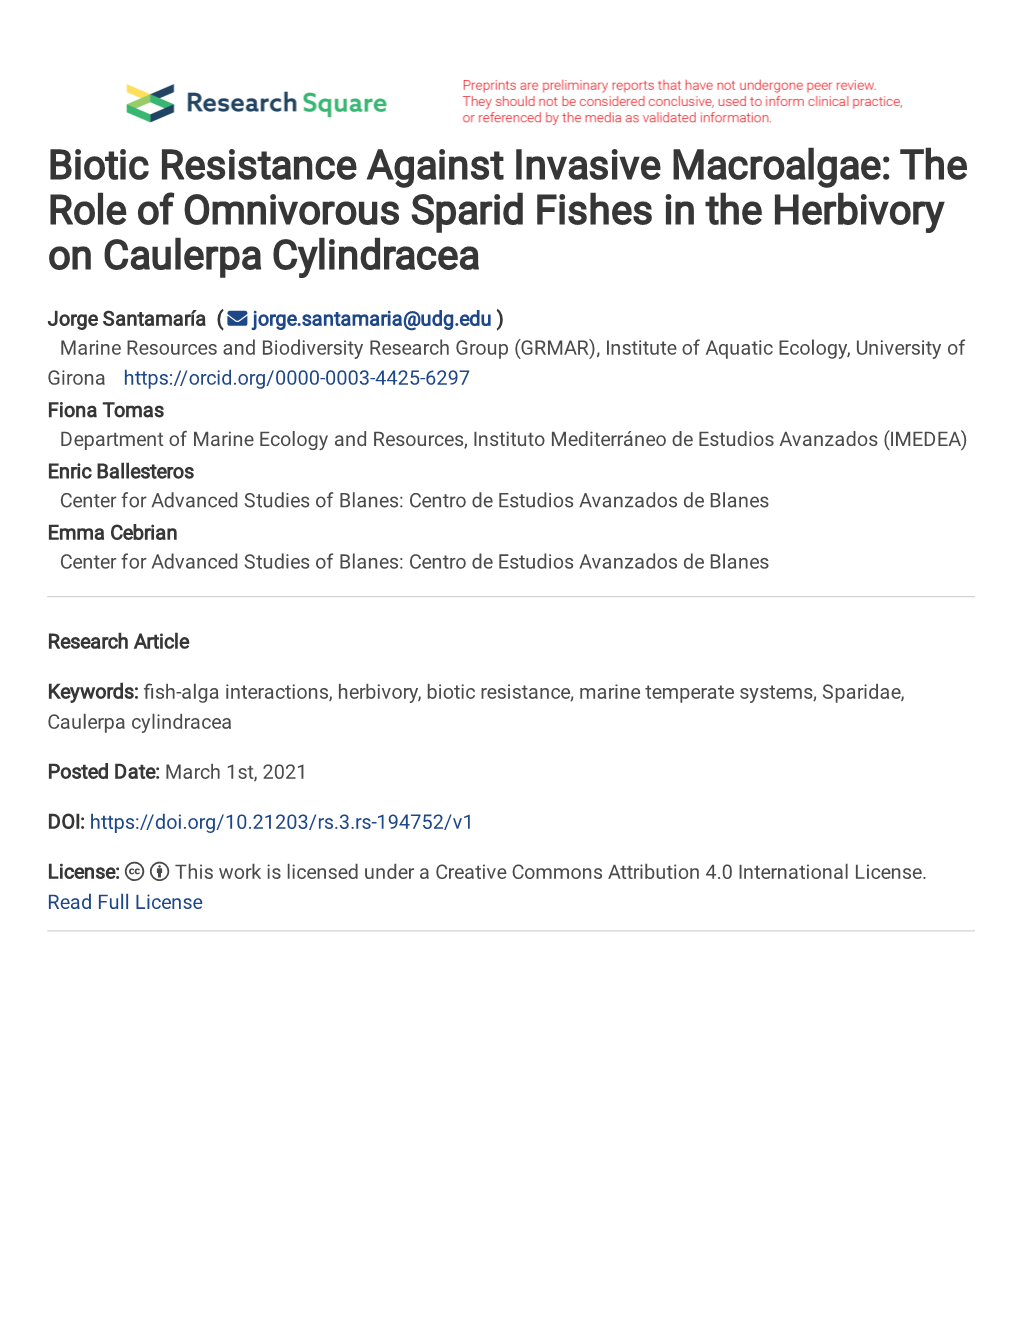 The Role of Omnivorous Sparid Fishes in the Herbivory on Caulerpa Cylindracea